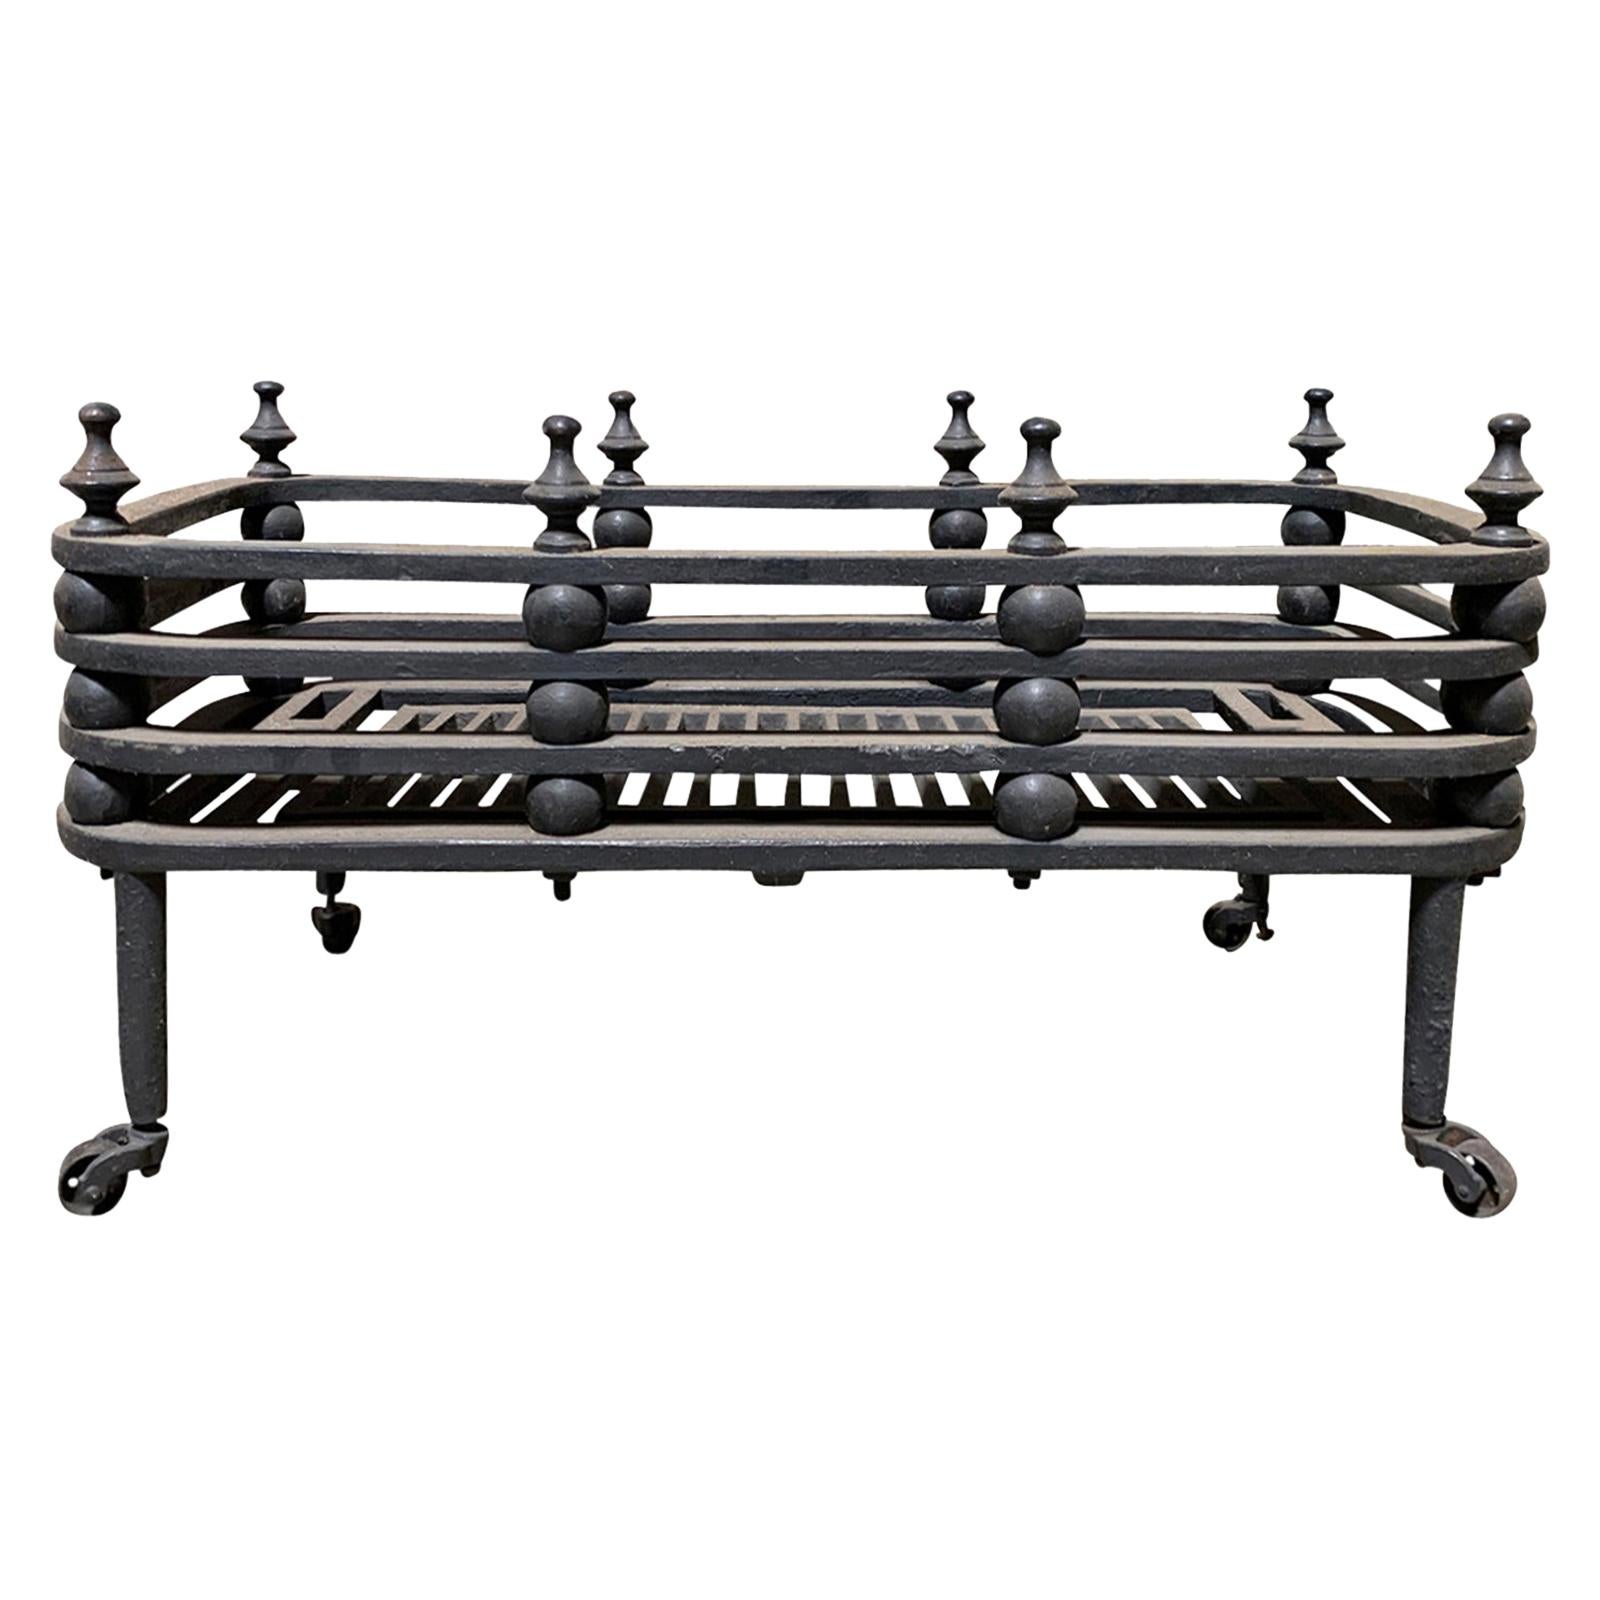 19th-20th Century Iron Fireplace Grate For Sale